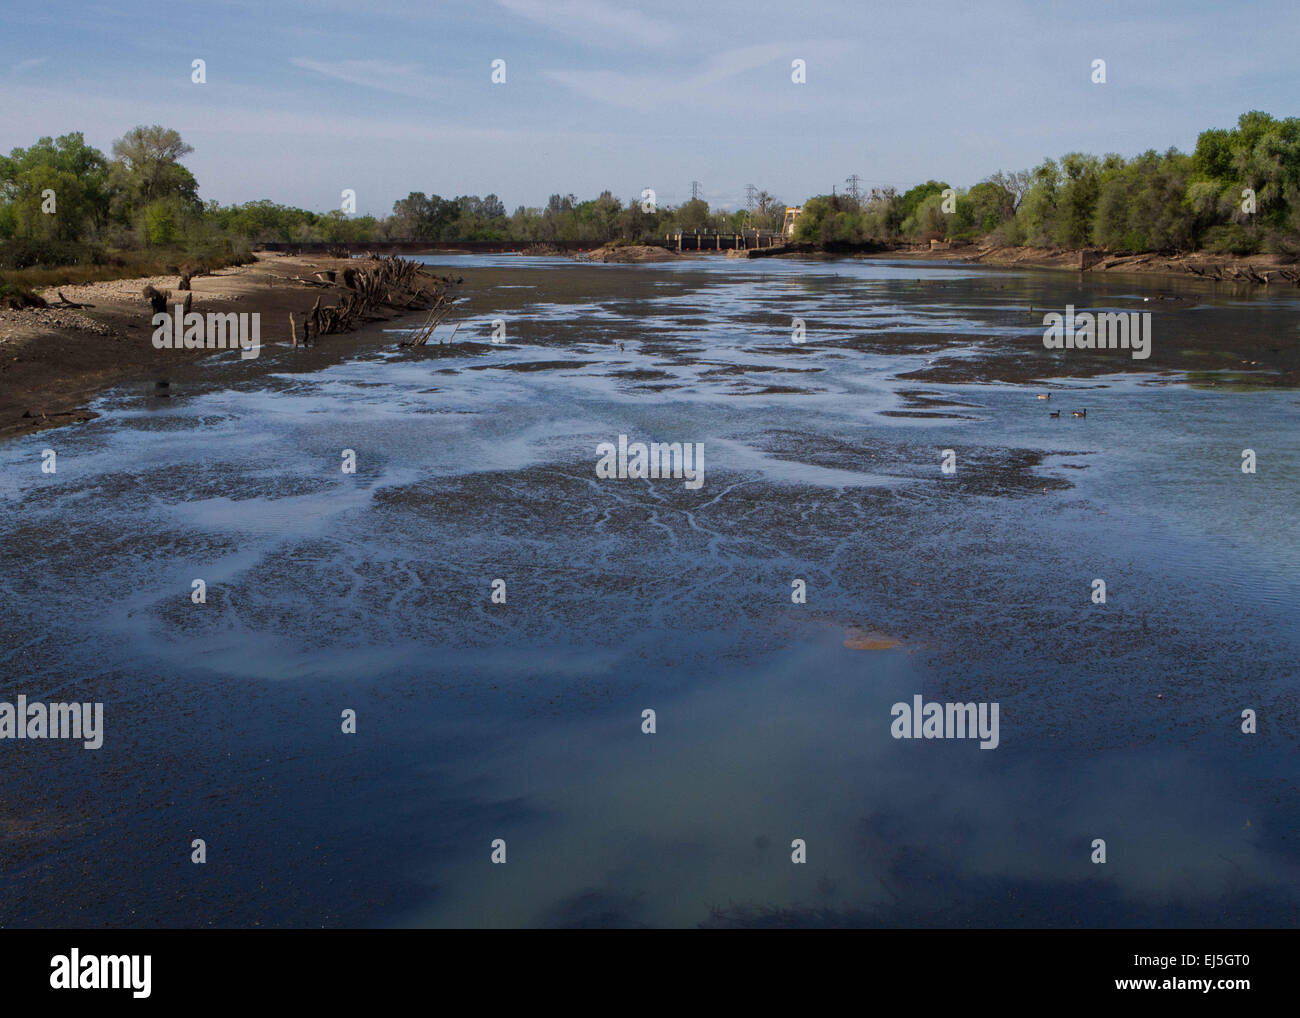 Ca, Usa. 21st Mar, 2015. With central California going into another drought year many rivers an reservoirs are at all time lows. The Merced River just down stream from Lake McClure and Lake McSwain is one of many. Lake McClure is at 7.67 percent of its capacity as of March 15th 2015. © Marty Bicek/ZUMA Wire/Alamy Live News Stock Photo